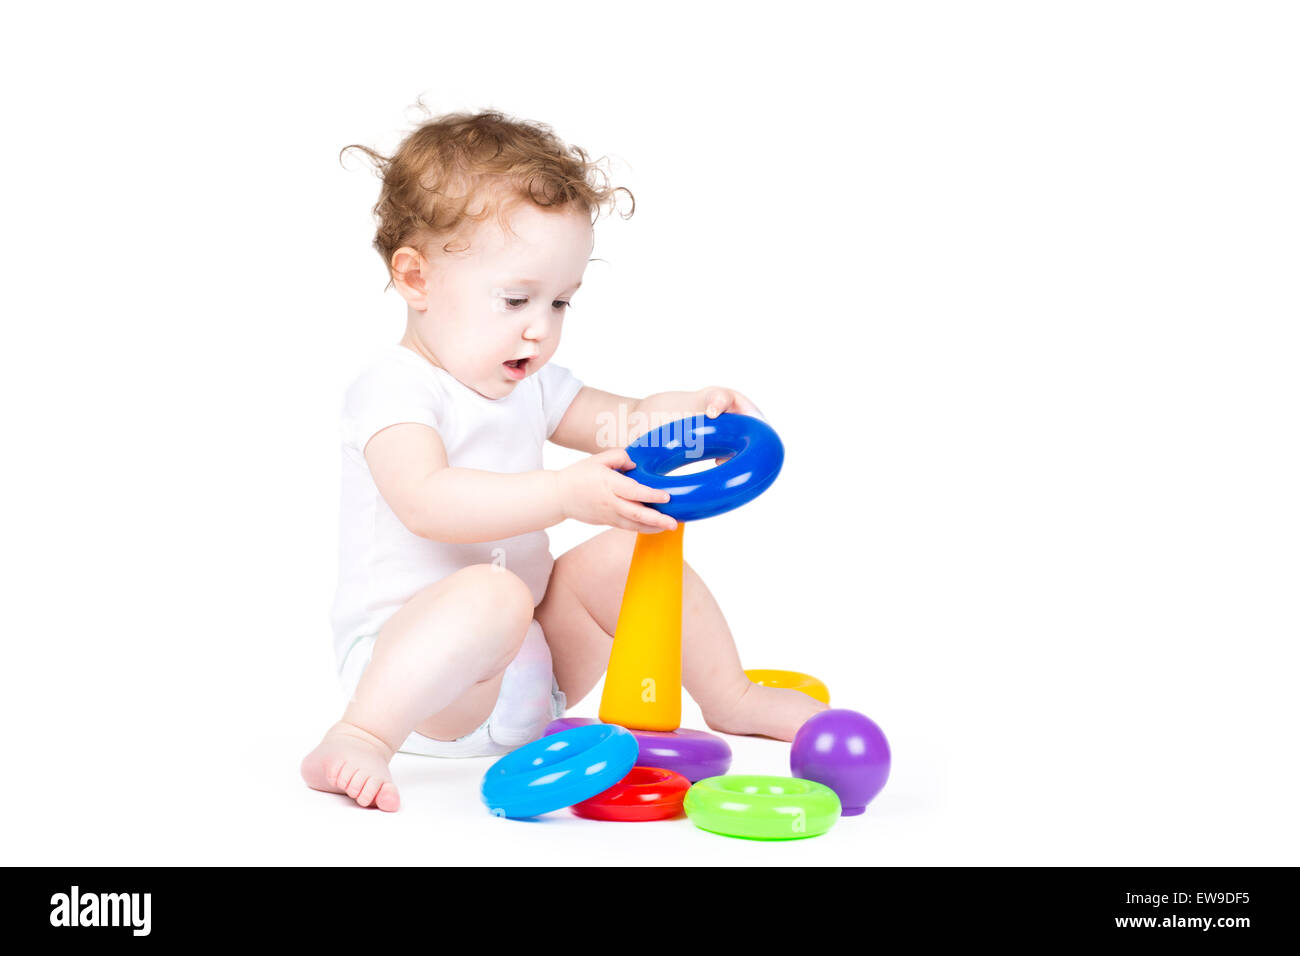 Cute baby playing with a plastic pyramid Stock Photo